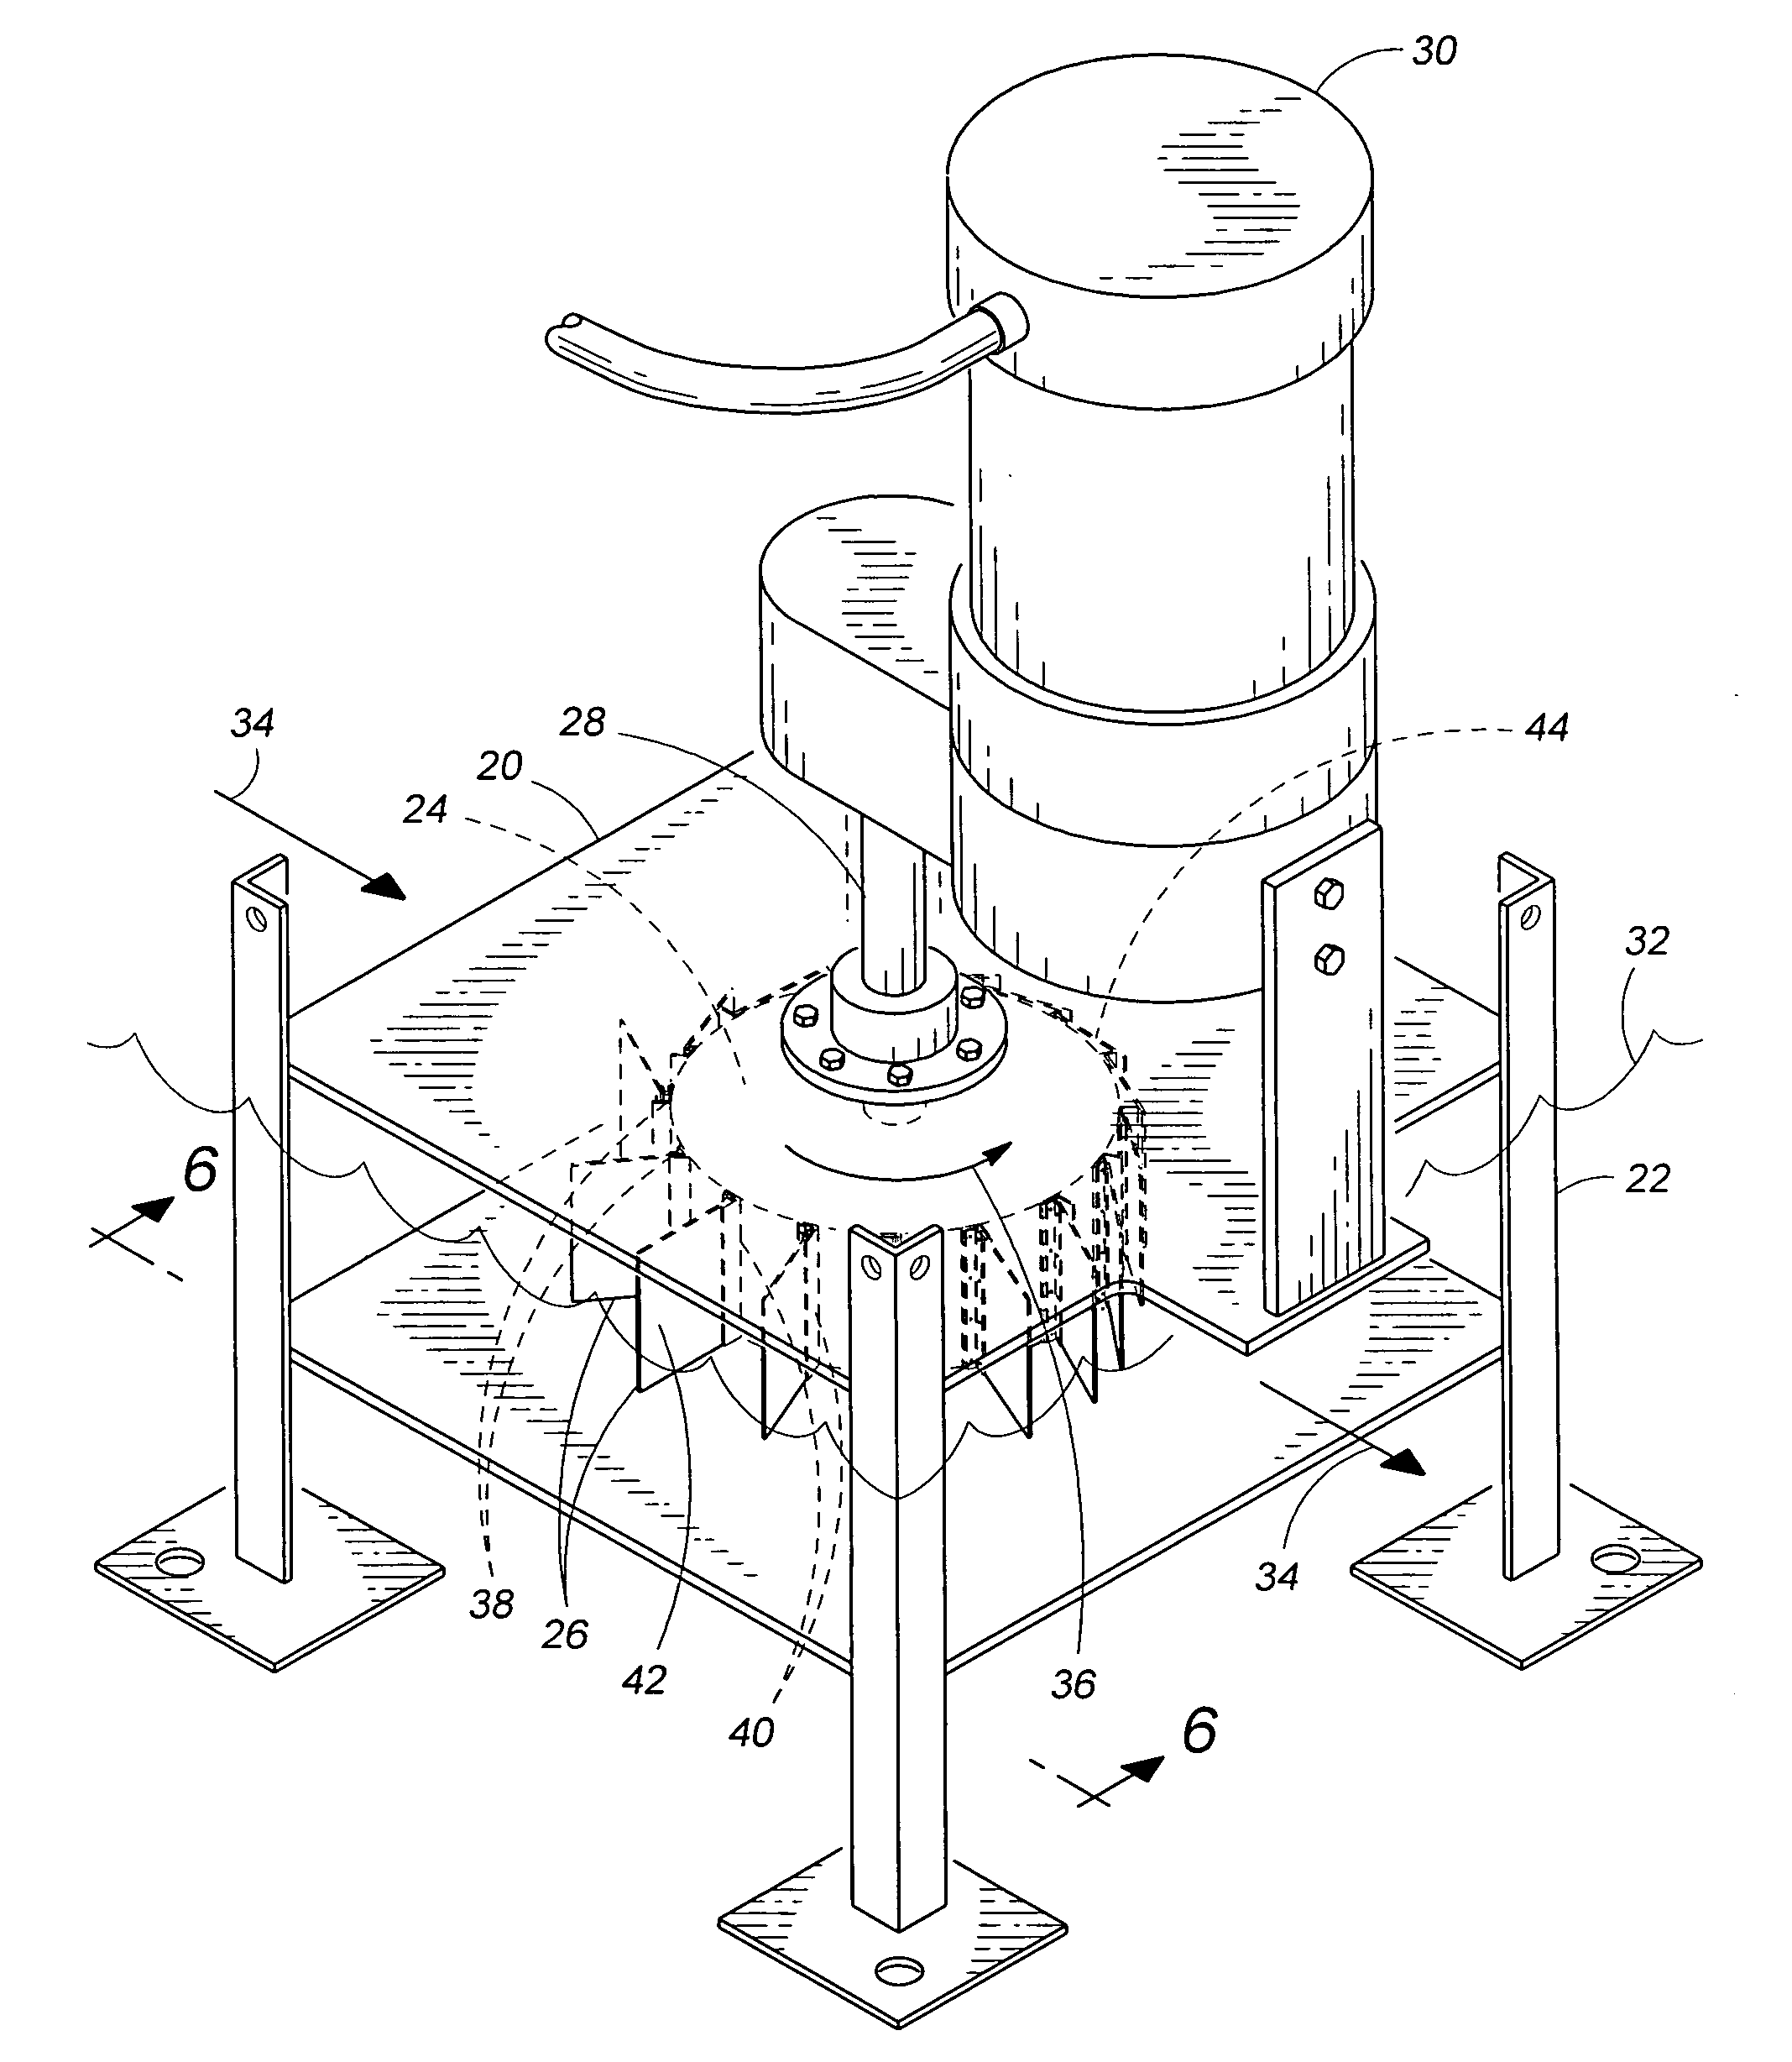 Hinged blade device to convert the natural flow or ocean or river current or ocean waves to rotational mechanical motion for power generation